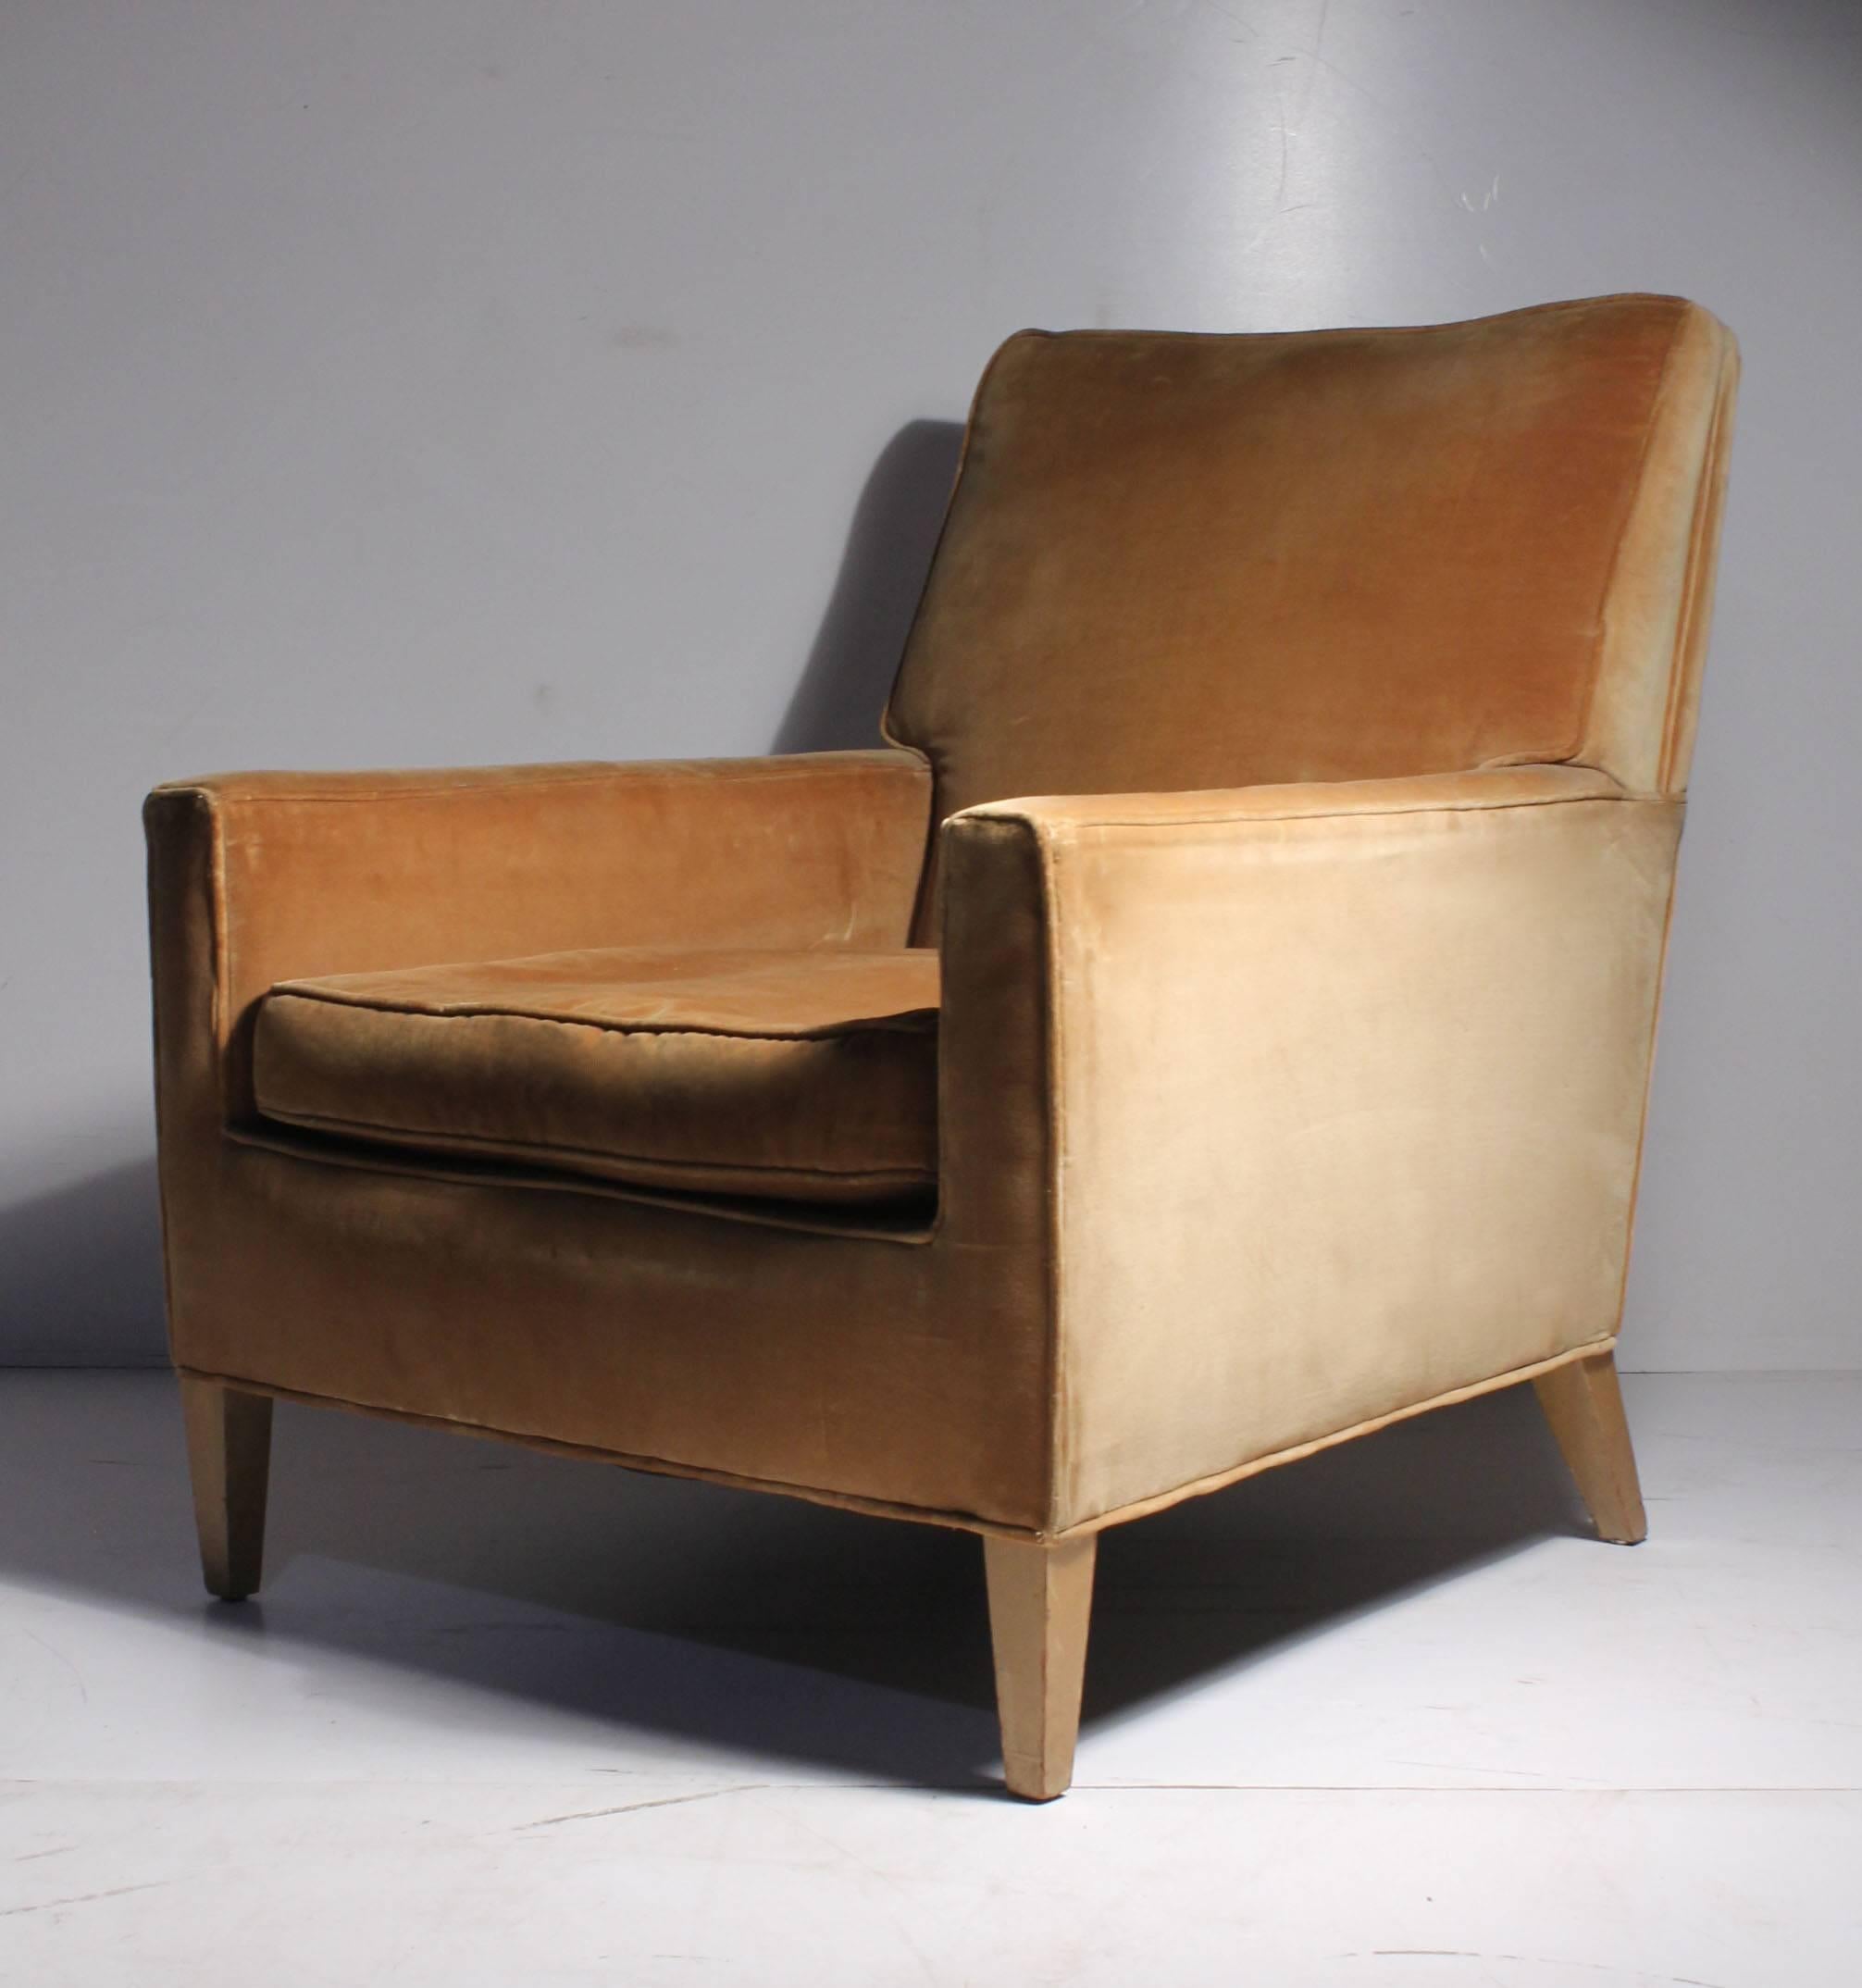 Vintage Robsjohn-Gibbings lounge chair for Widdicomb. Beautiful proportions. A more uncommon deep lounge form.

